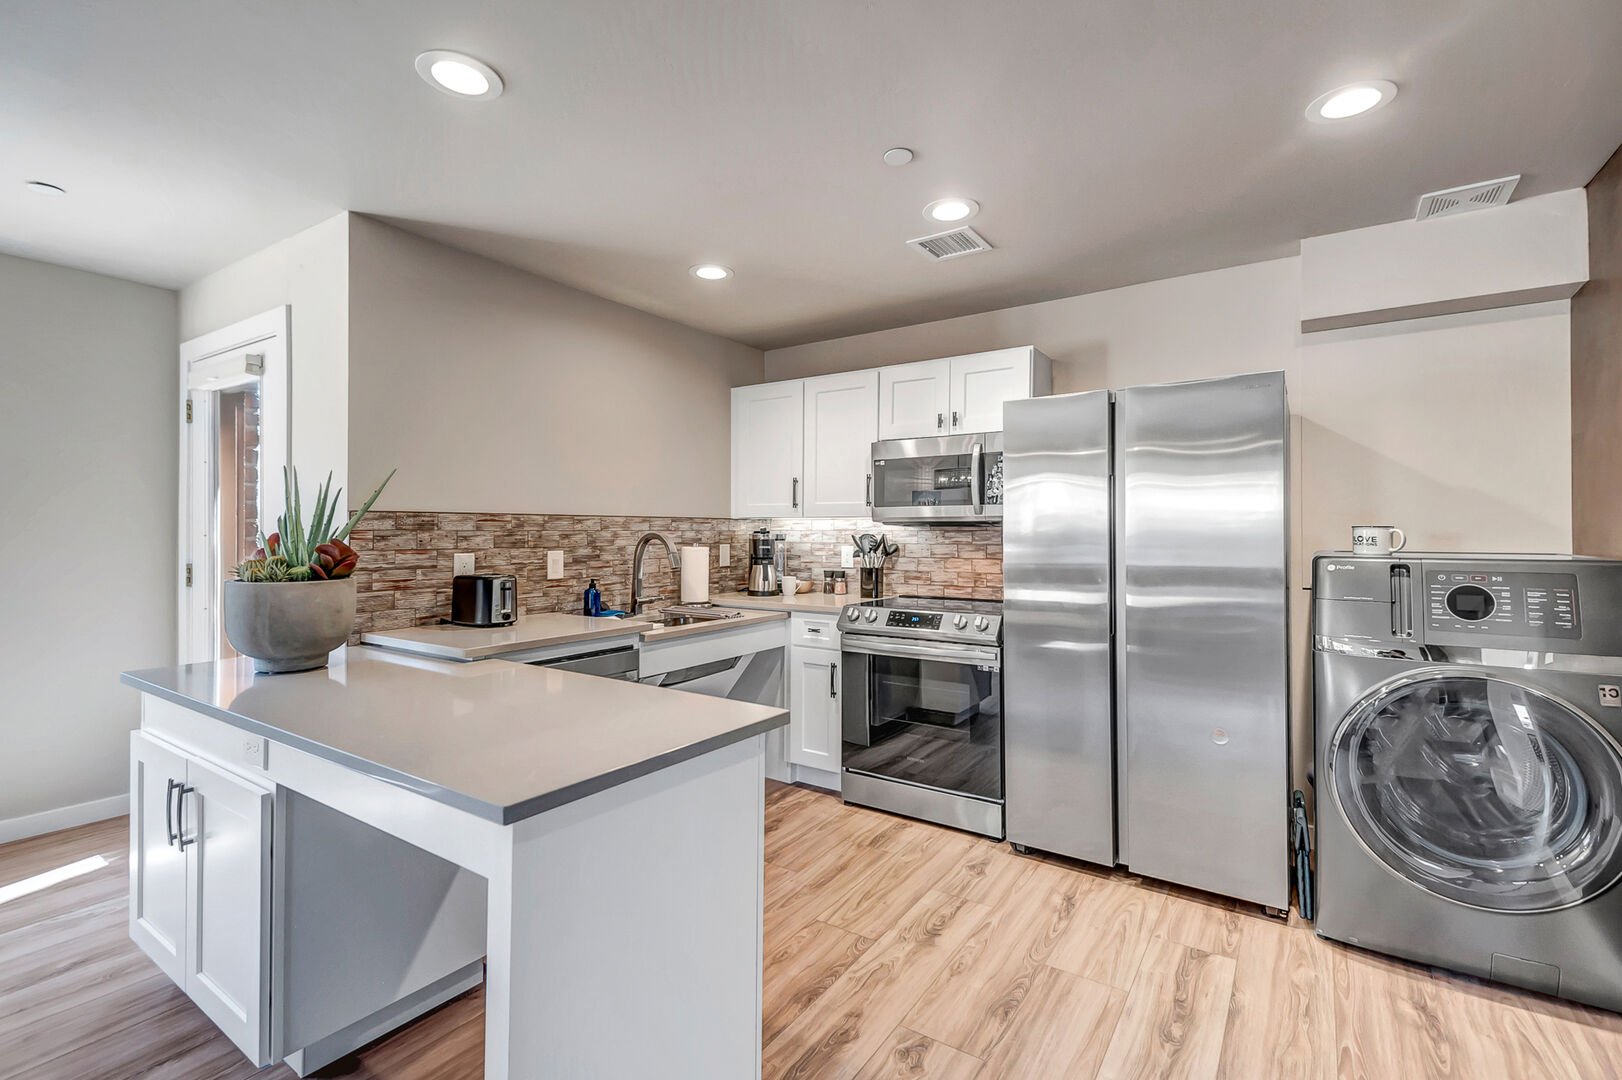 Fully remodeled and equipped kitchen with stainless steel appliances